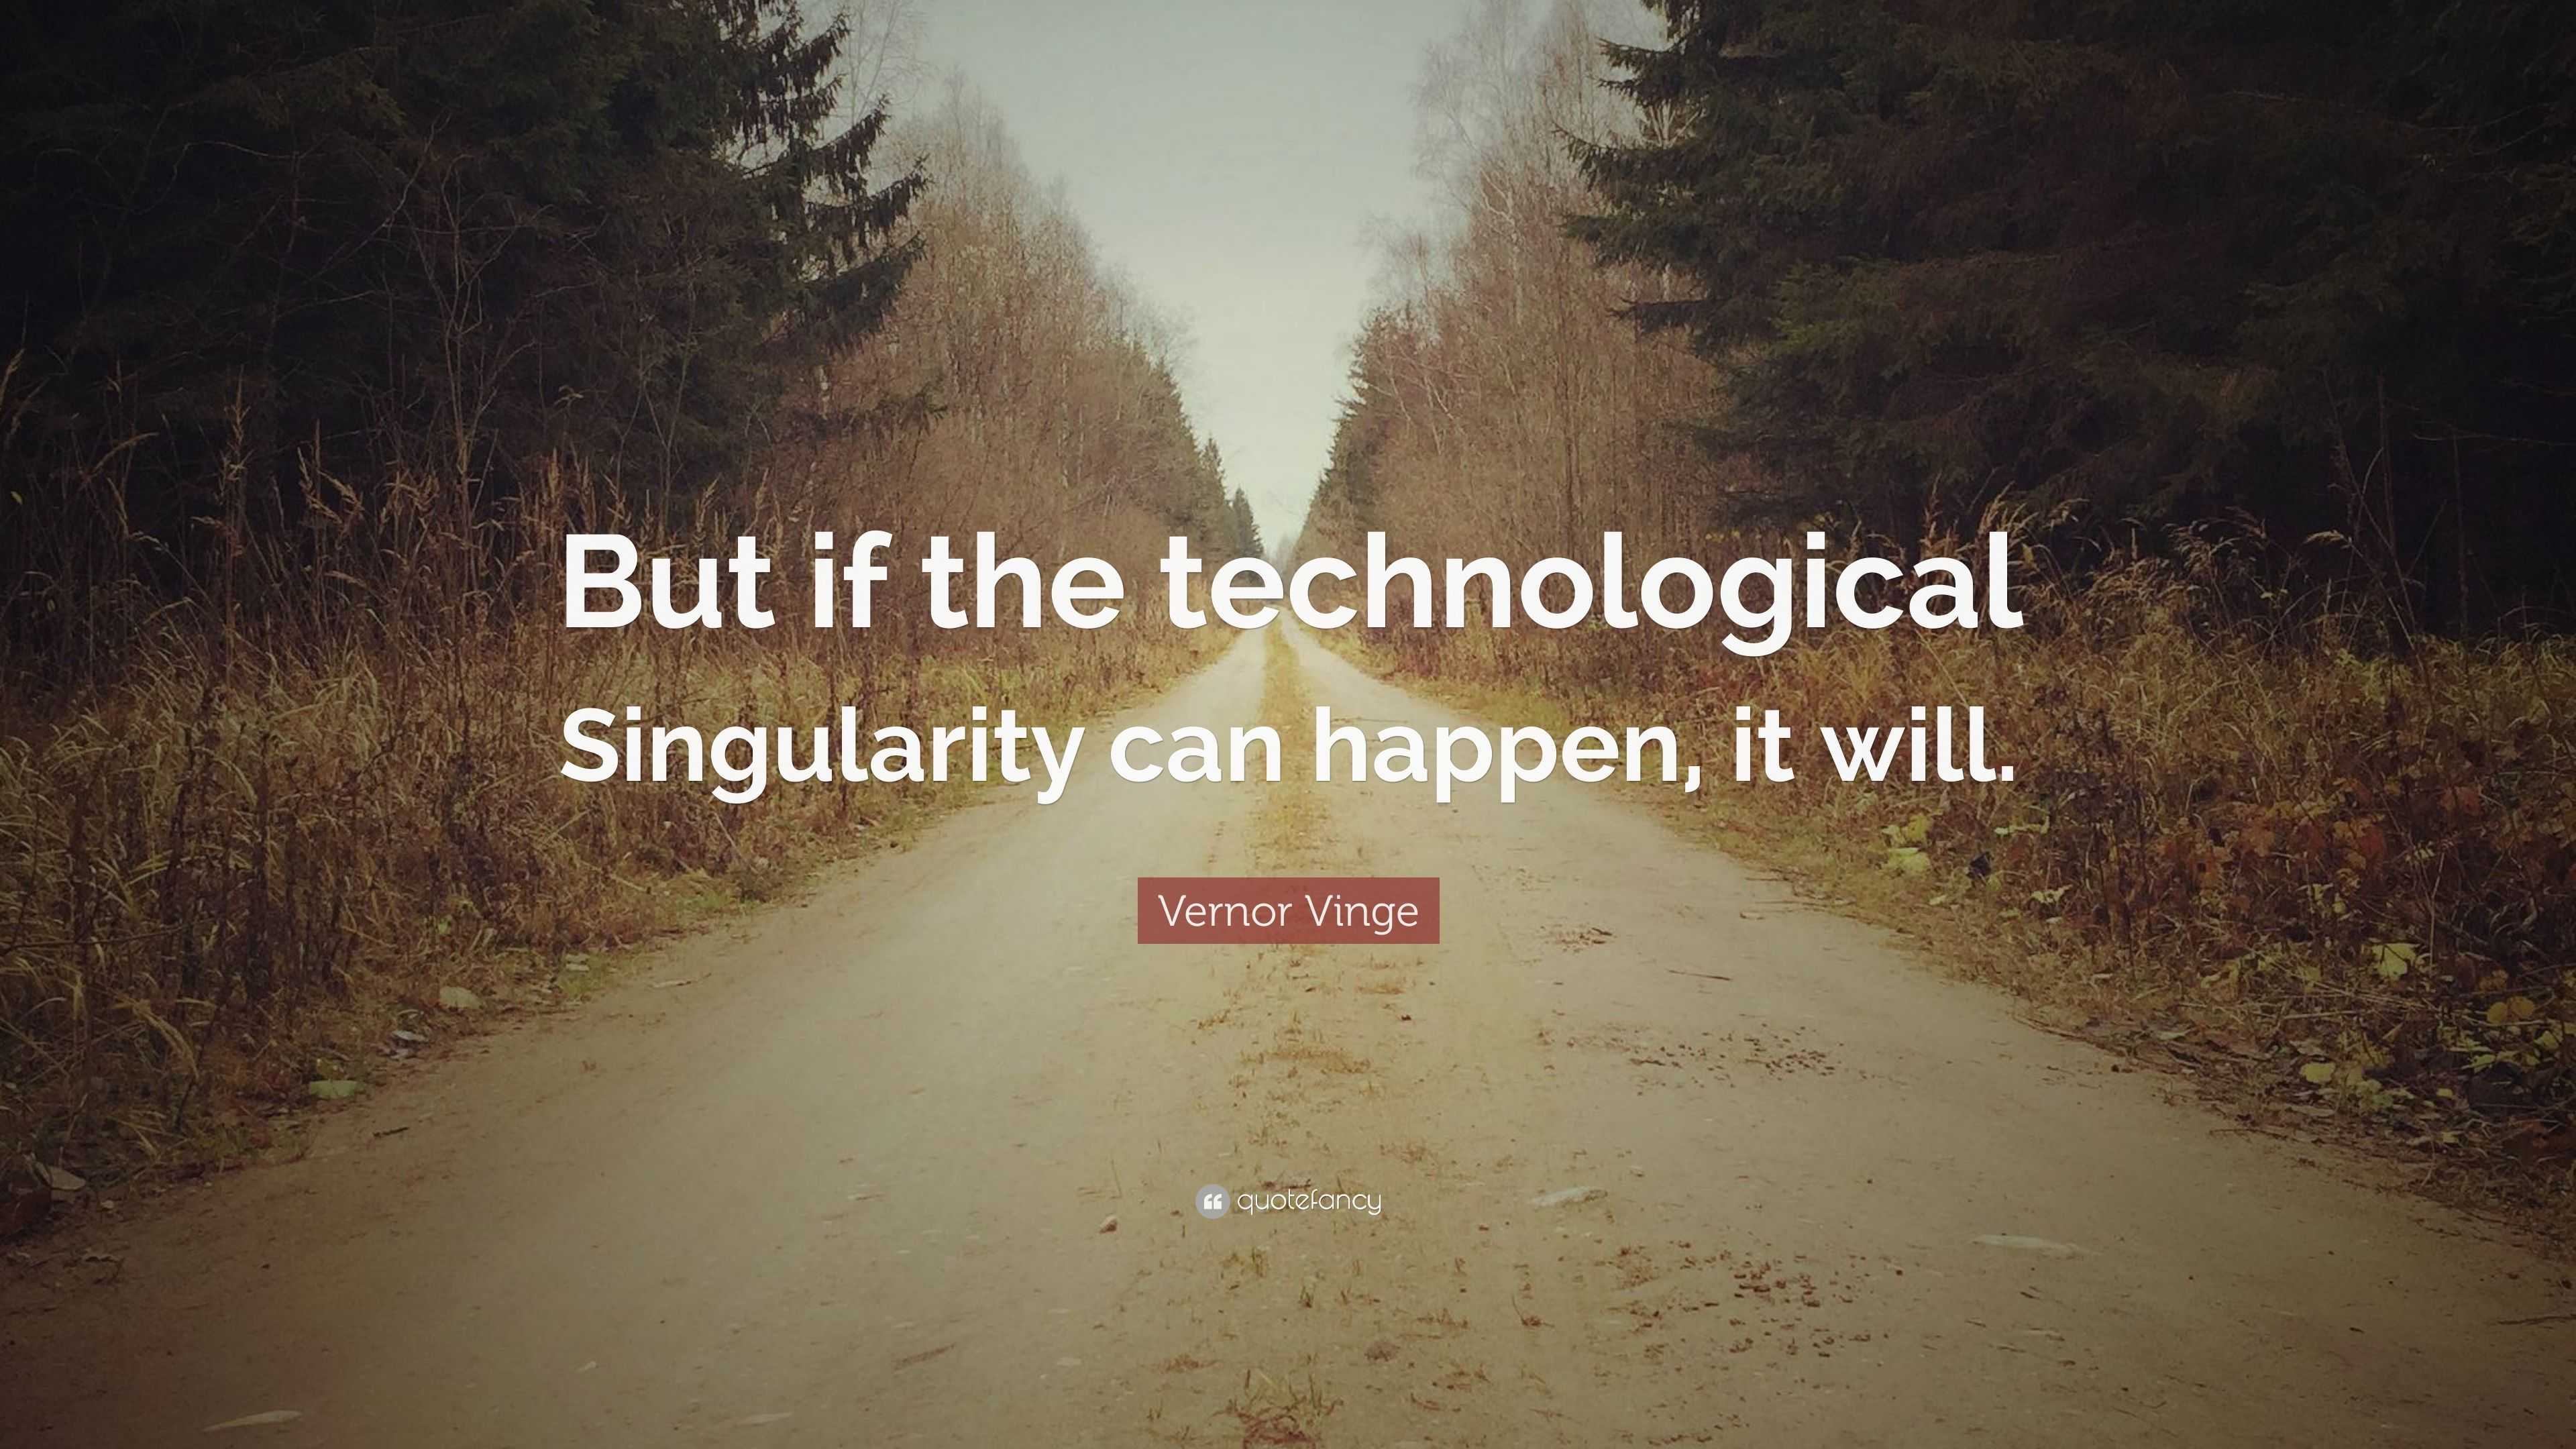 Vernor Vinge - What if the Singularity Does NOT happen? - Long Now